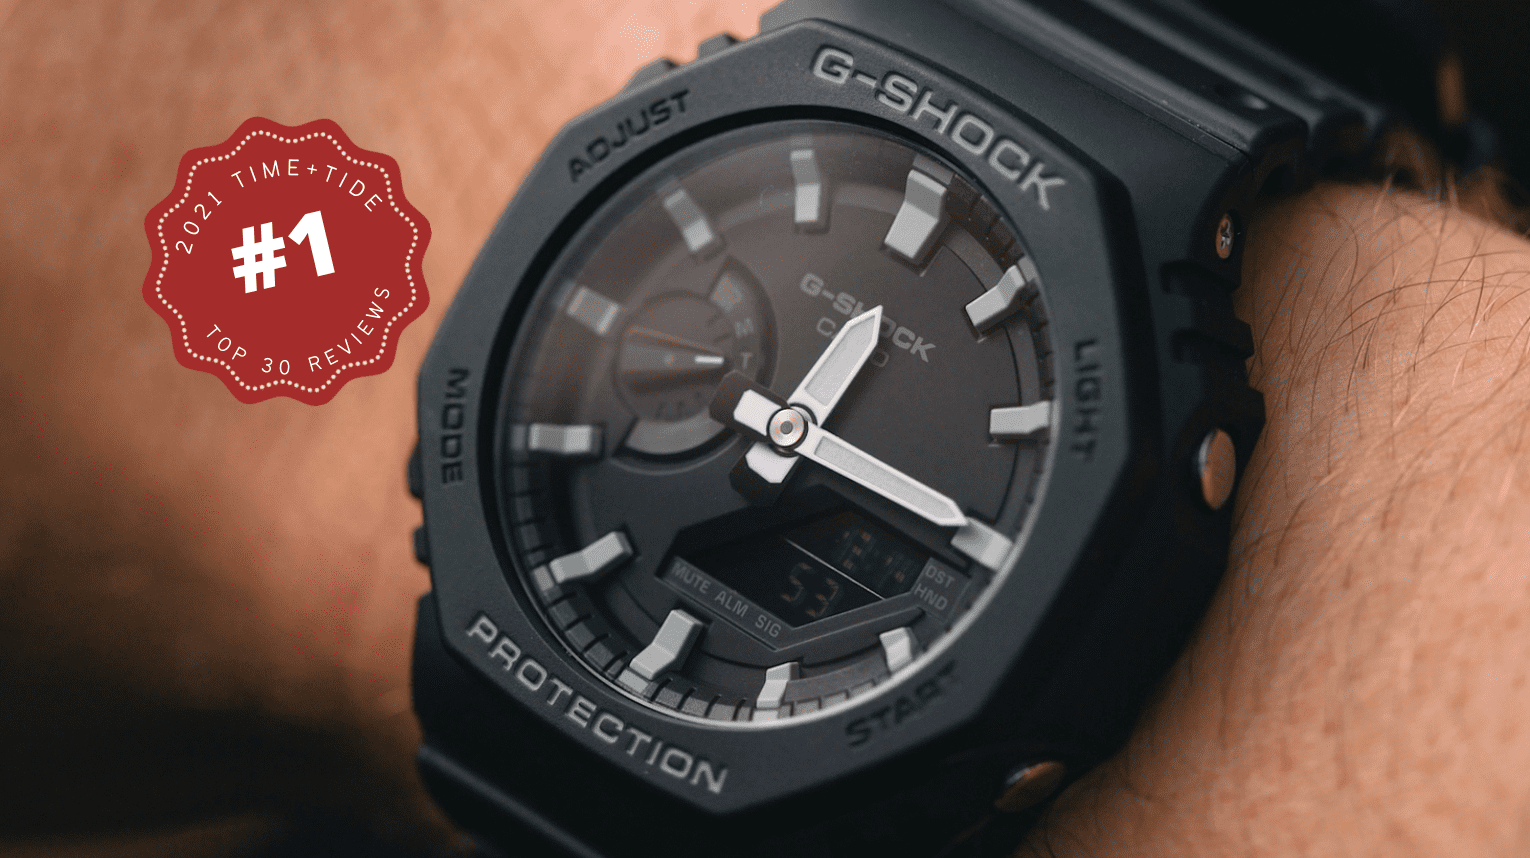 OUR TOP WATCH REVIEW OF 2021: The Casio G-Shock GA2100-1A 'CasiOak'